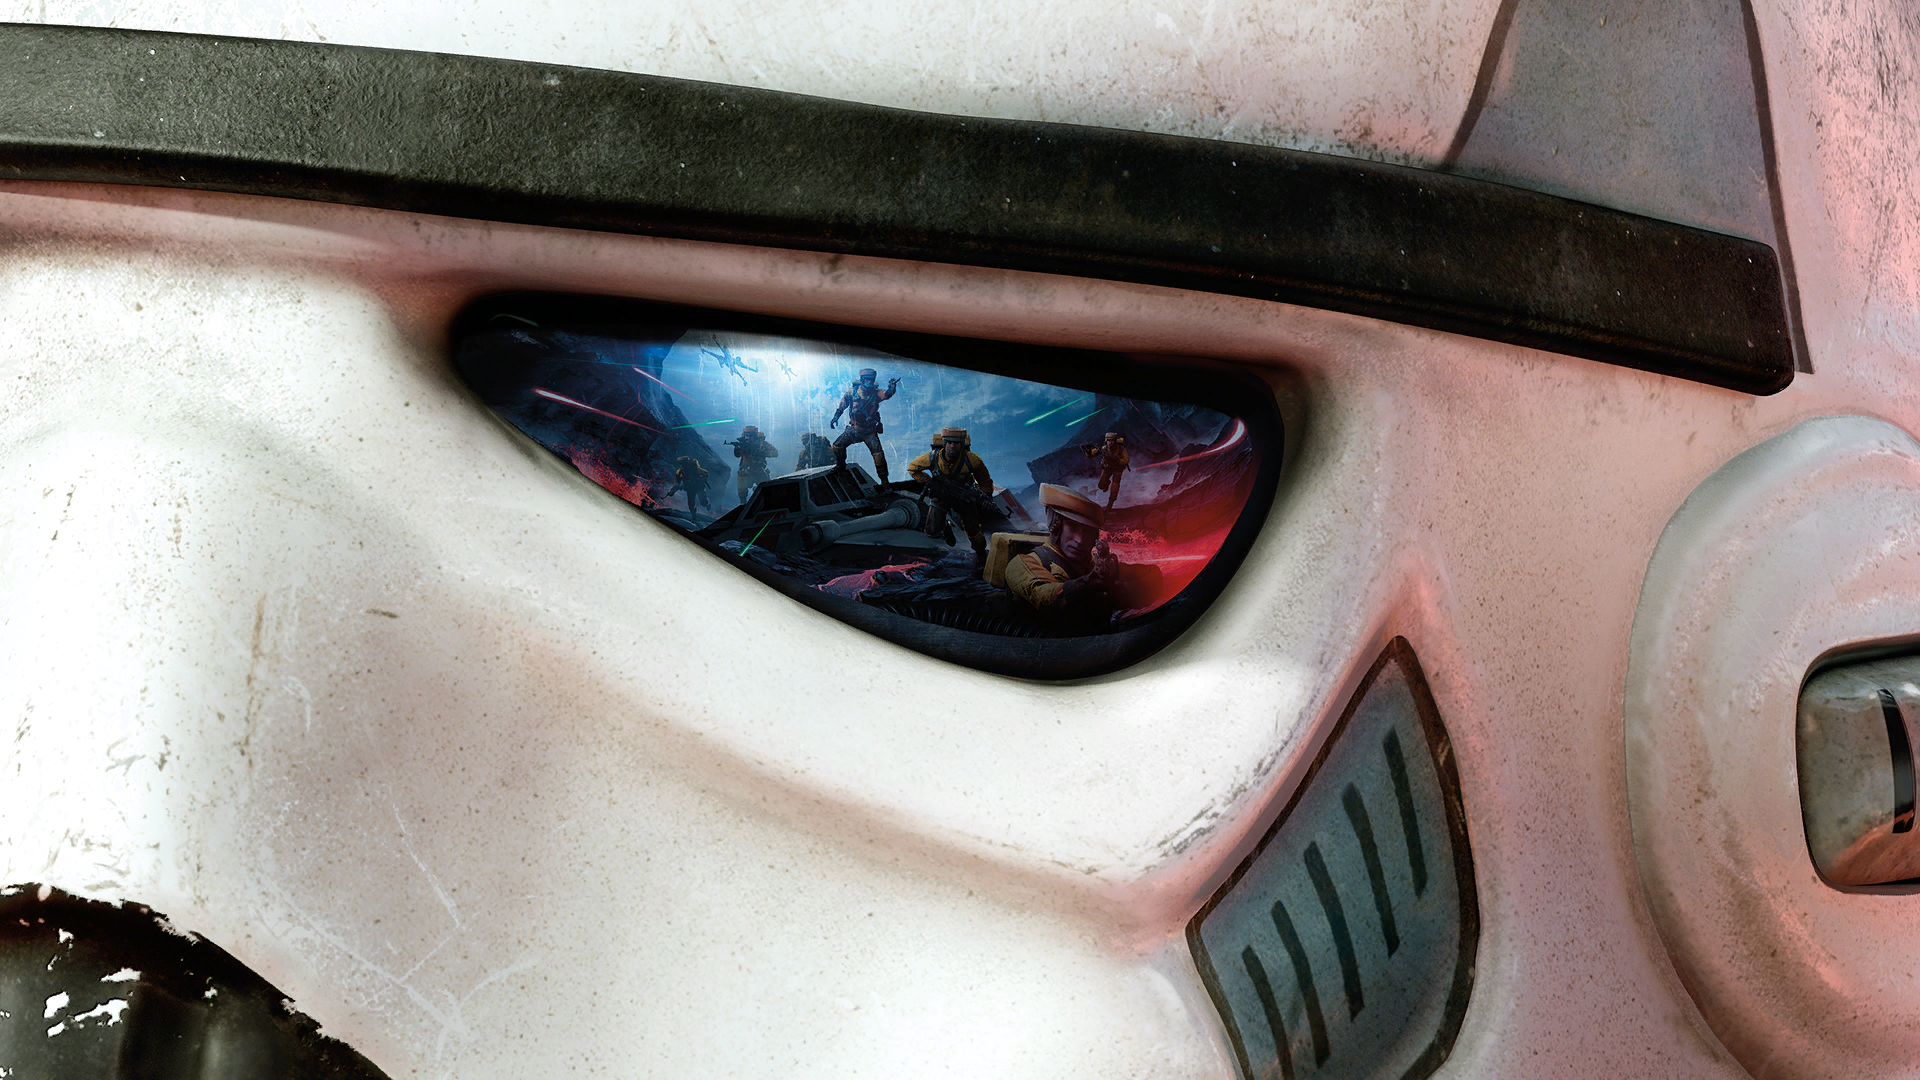 General 1920x1080 Star Wars: Battlefront stormtrooper closeup battle reflection video games PC gaming Imperial Stormtrooper video game art science fiction